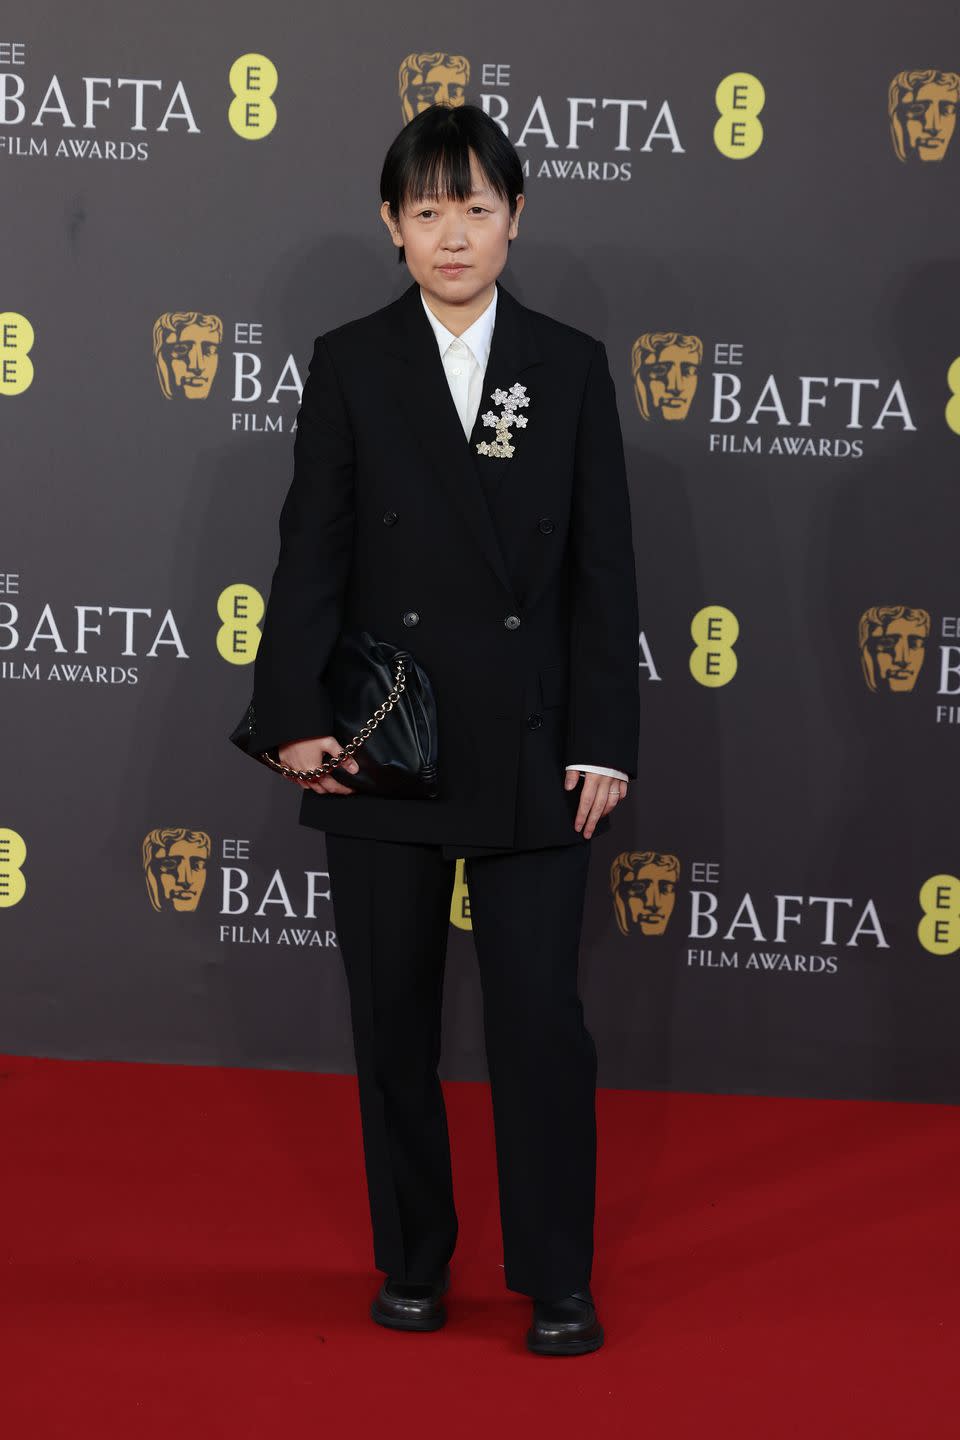 london, england february 18 celine song attends the 2024 ee bafta film awards at the royal festival hall on february 18, 2024 in london, england photo by neil mockfordfilmmagic